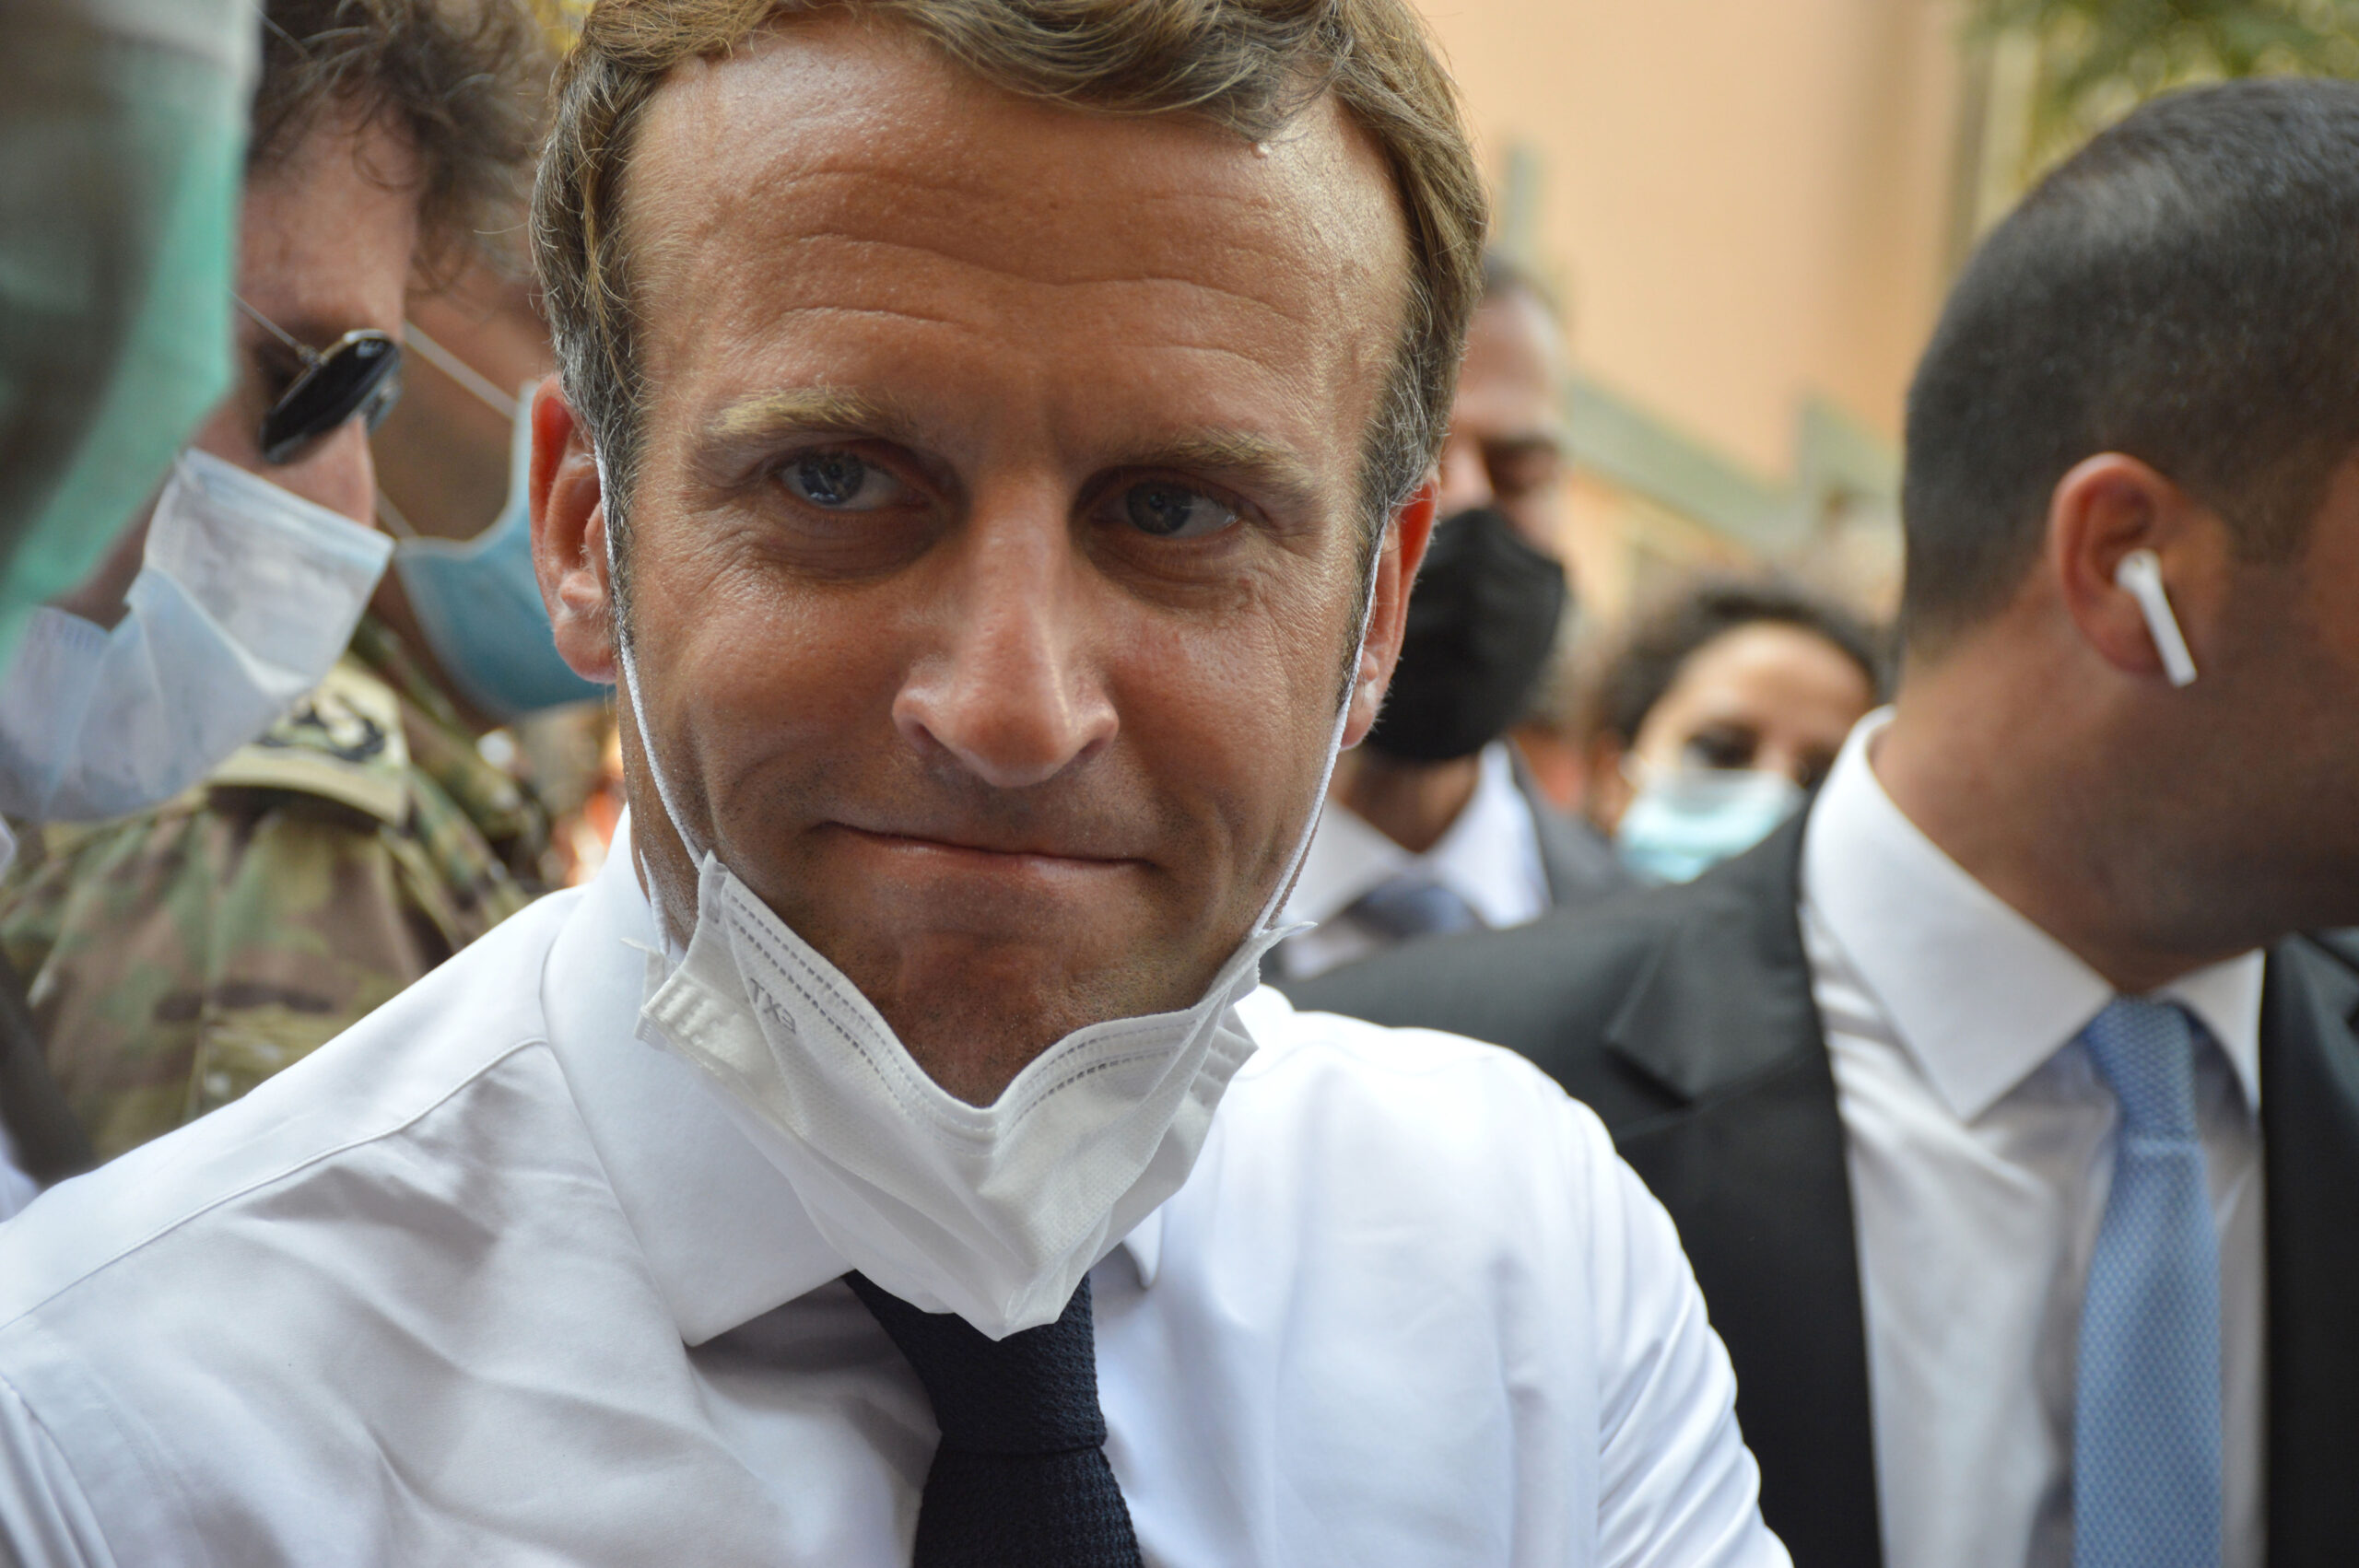 Macron at the Head of the Pack